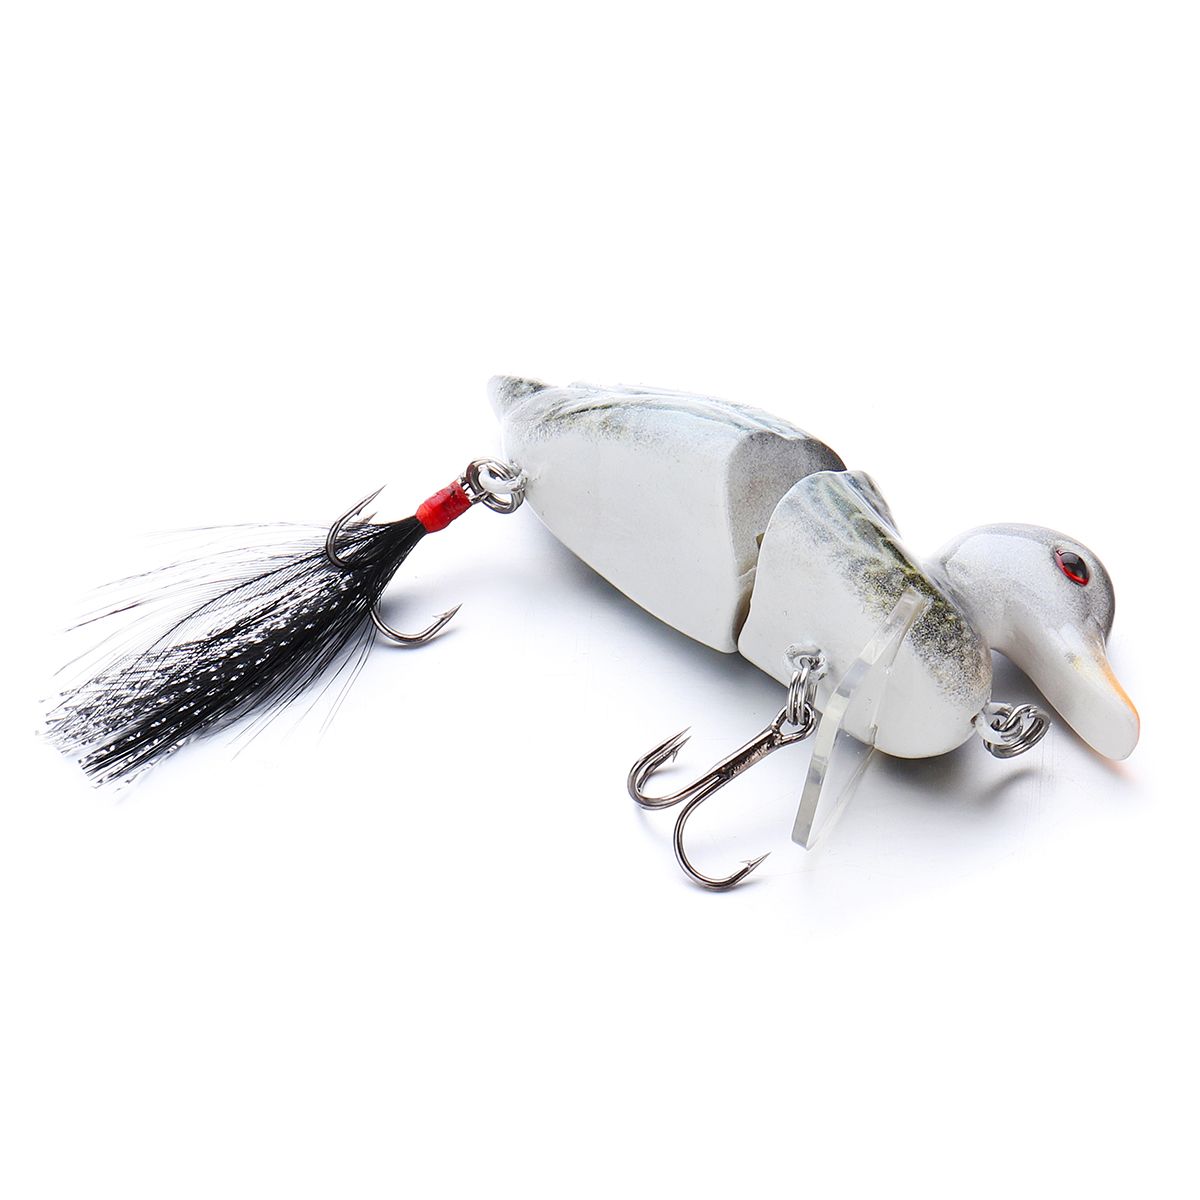 3D-Eyes-Duck-Lure-Artificial-Fishing-Bait-Catching-Topwater-With-Hooks-Fishing-1496193